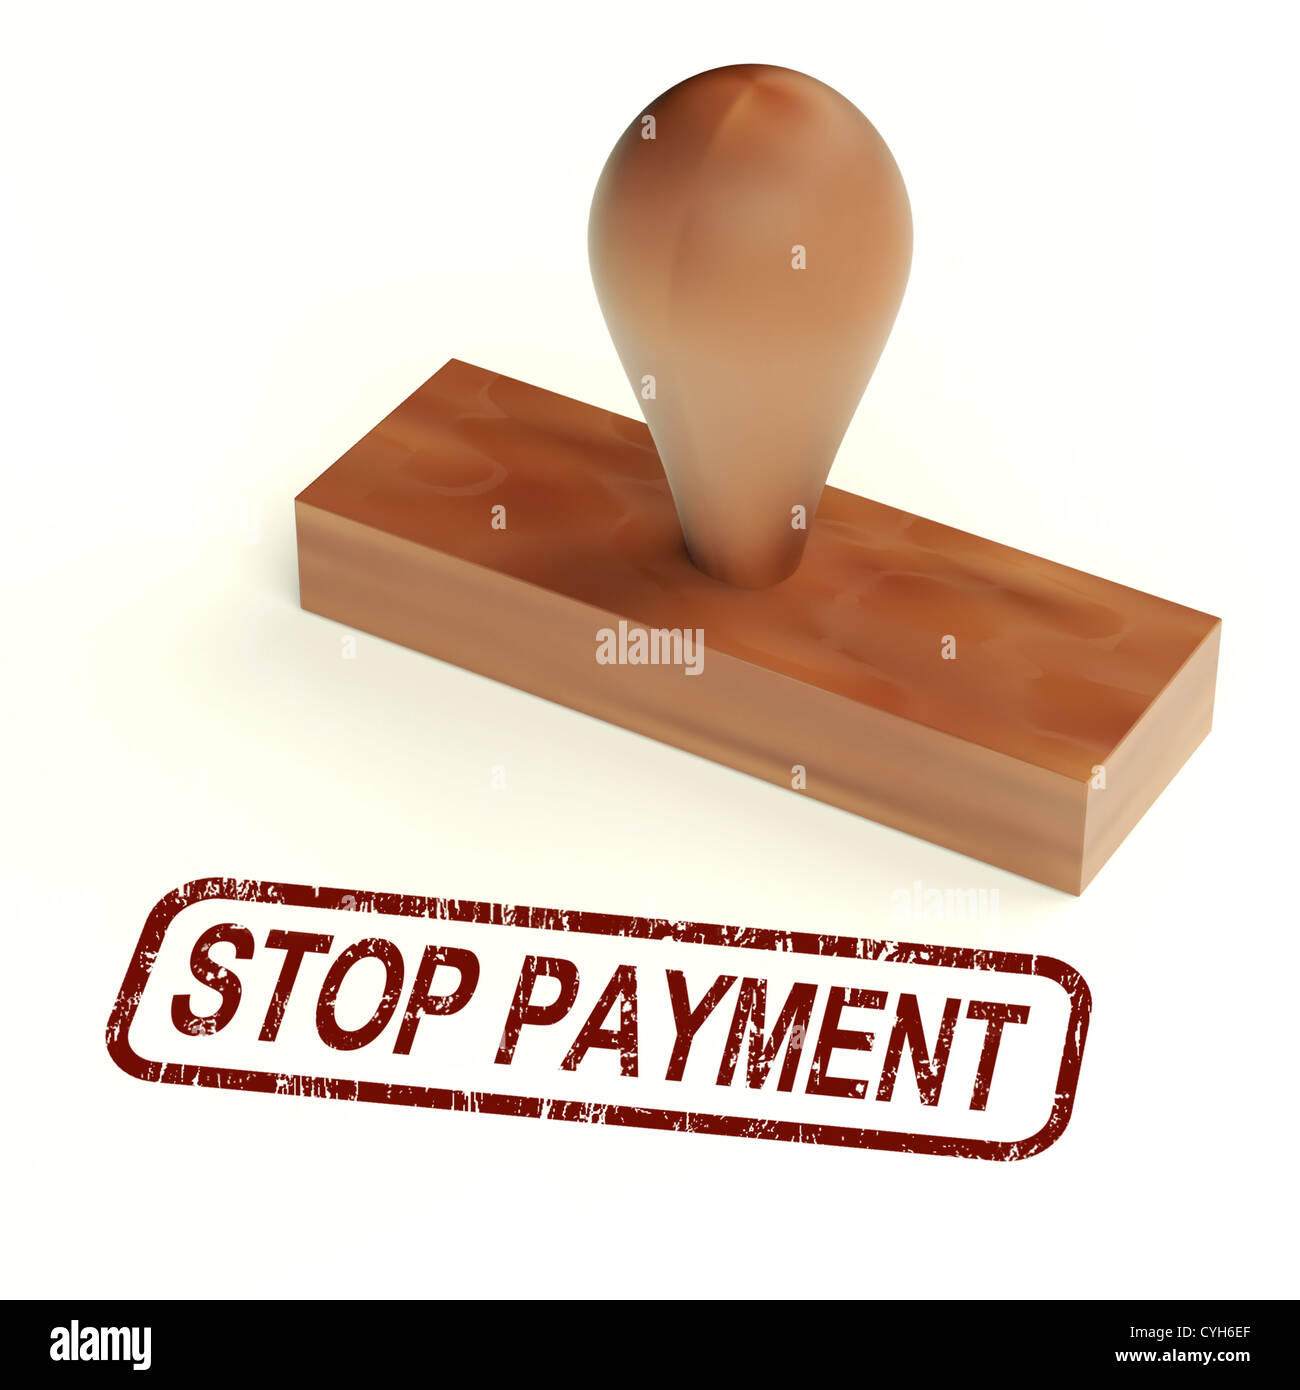 Stop Payment Rubber Stamp Showing Bill Transaction Rejected Stock Photo